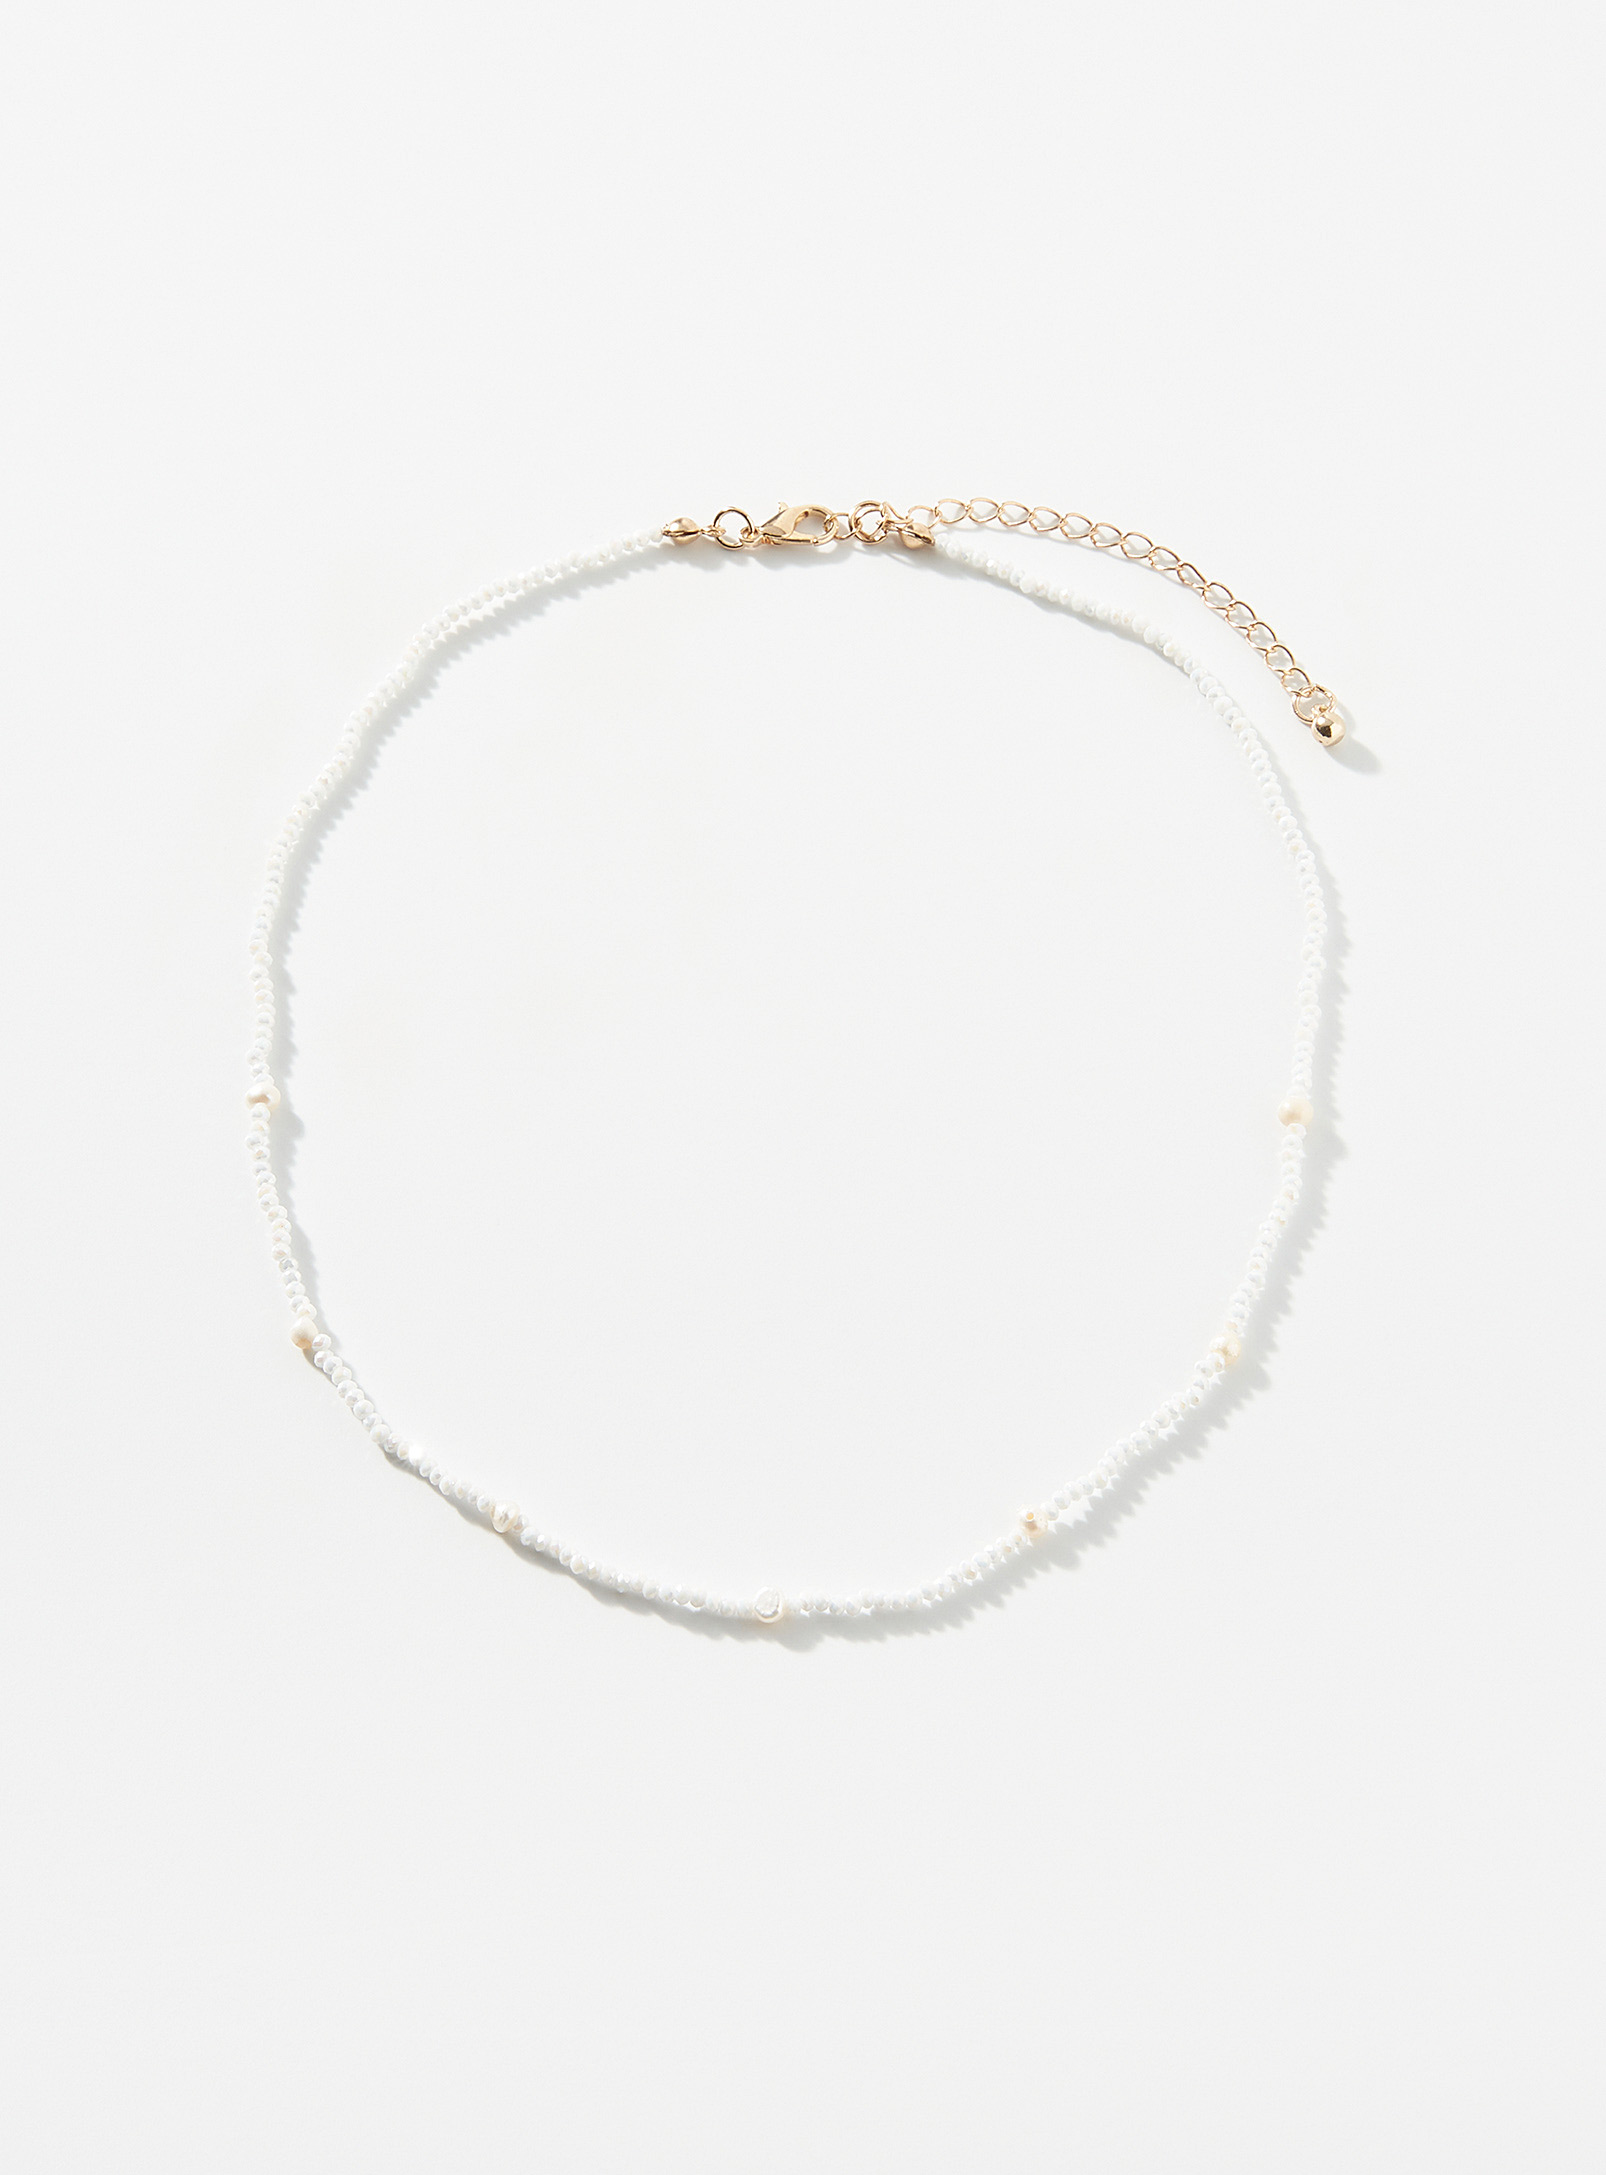 Simons - Women's Pearly-bead necklace